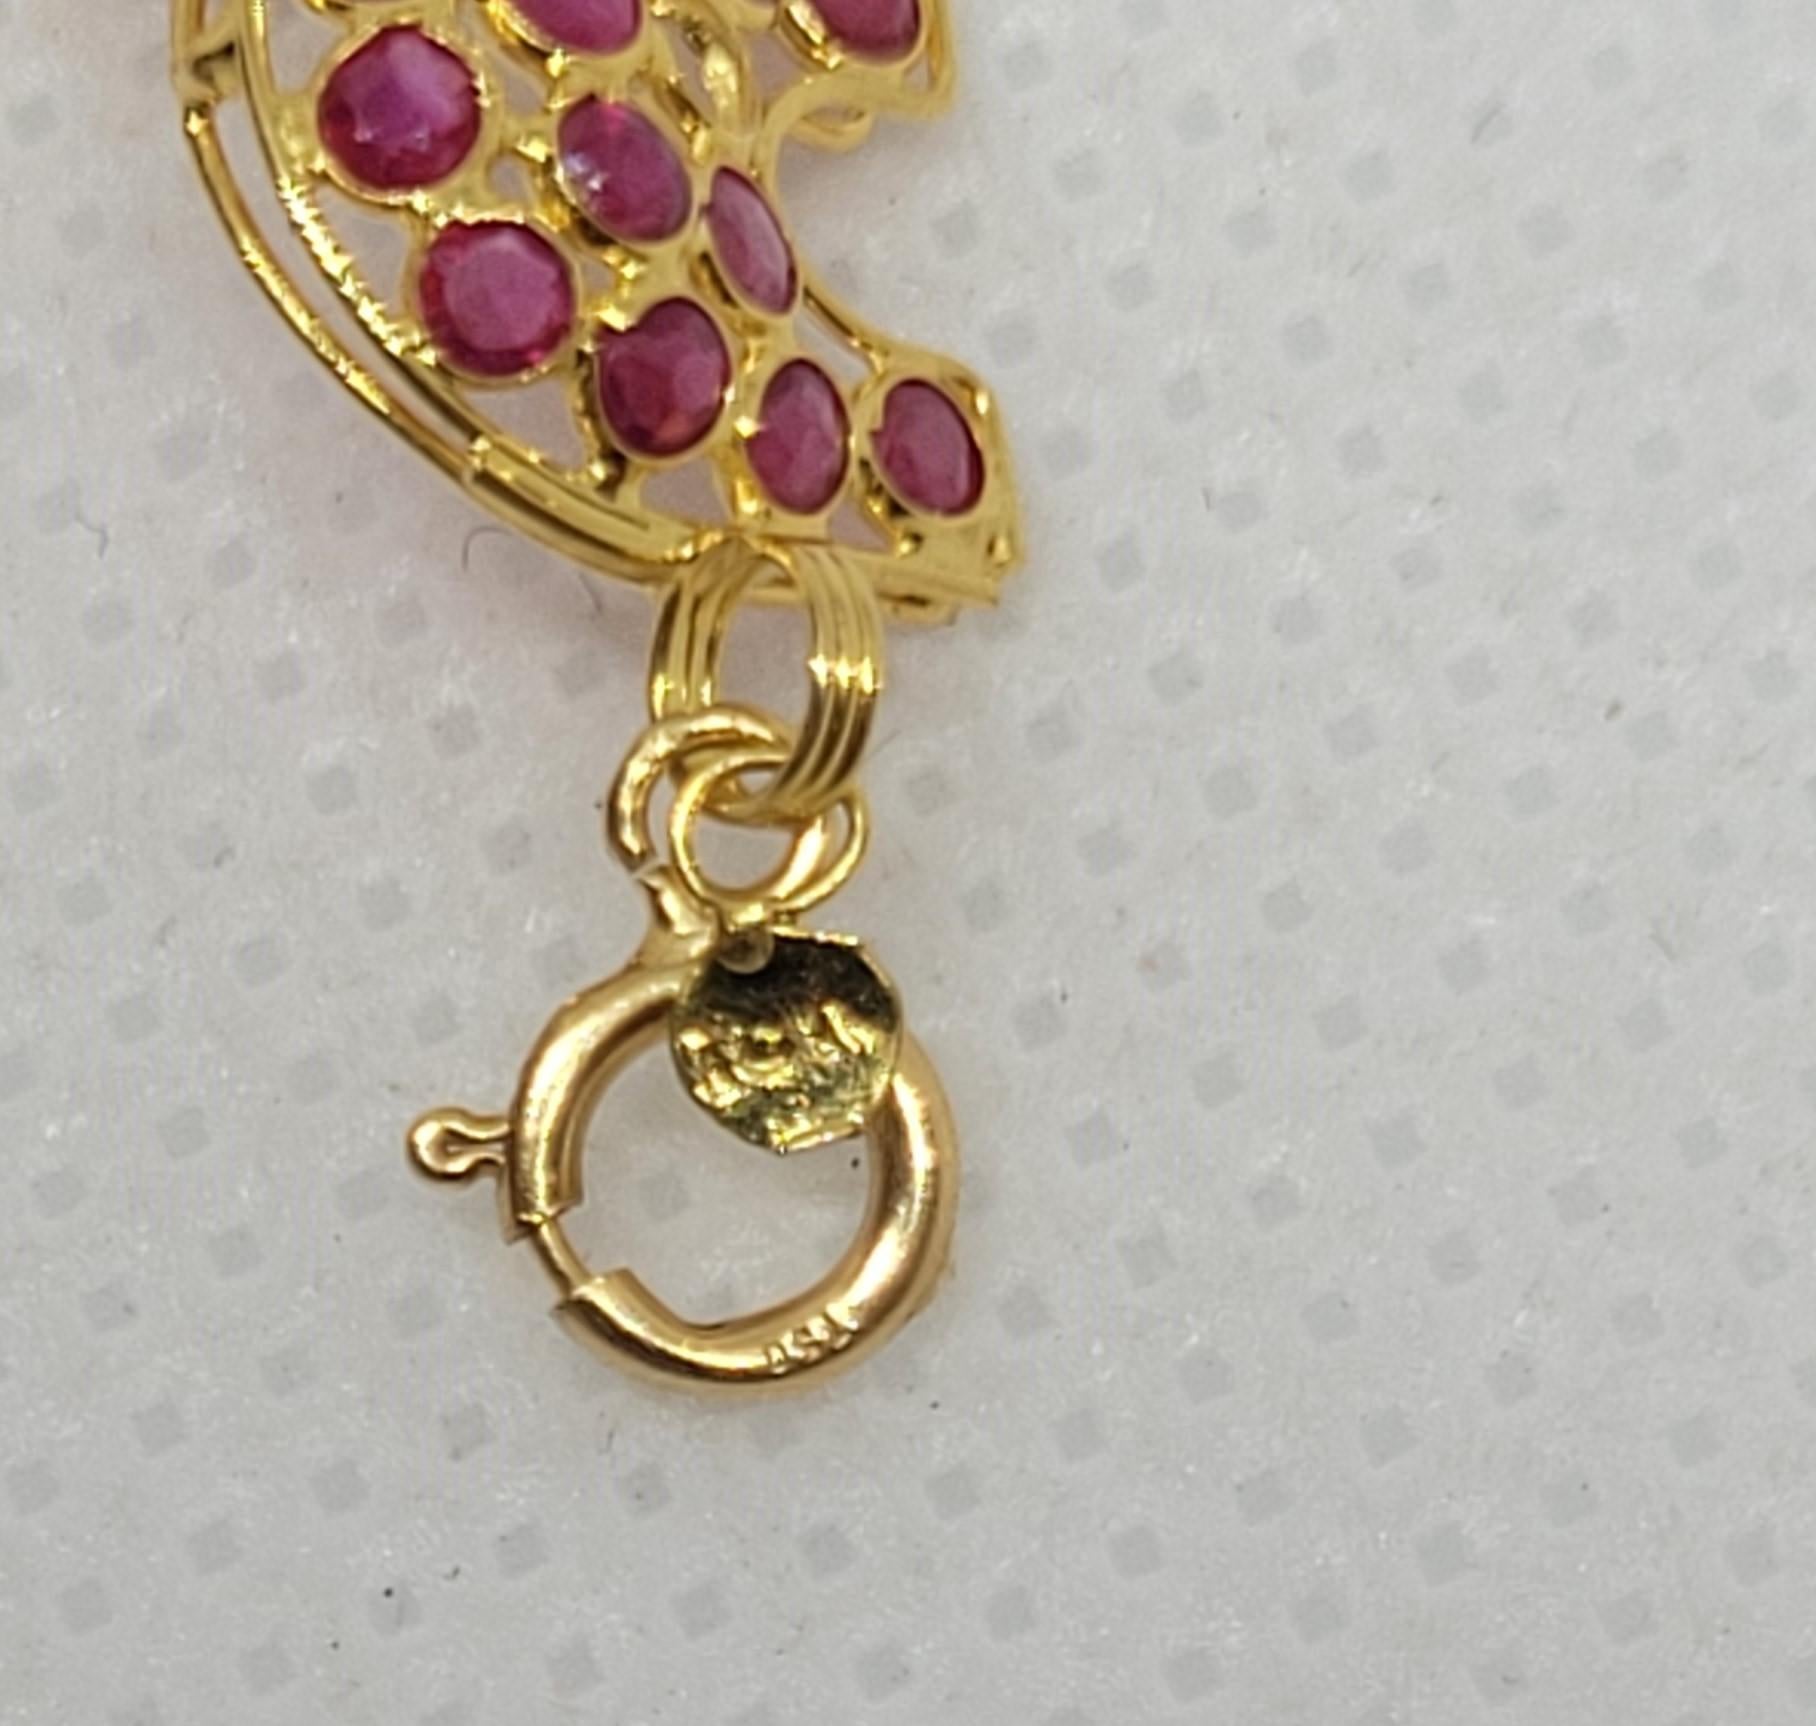 18kt Yellow Gold Ruby Sapphire Elephant Link Bracelet 7 Inches 10mm Wide 6 gr In Good Condition For Sale In Rancho Santa Fe, CA